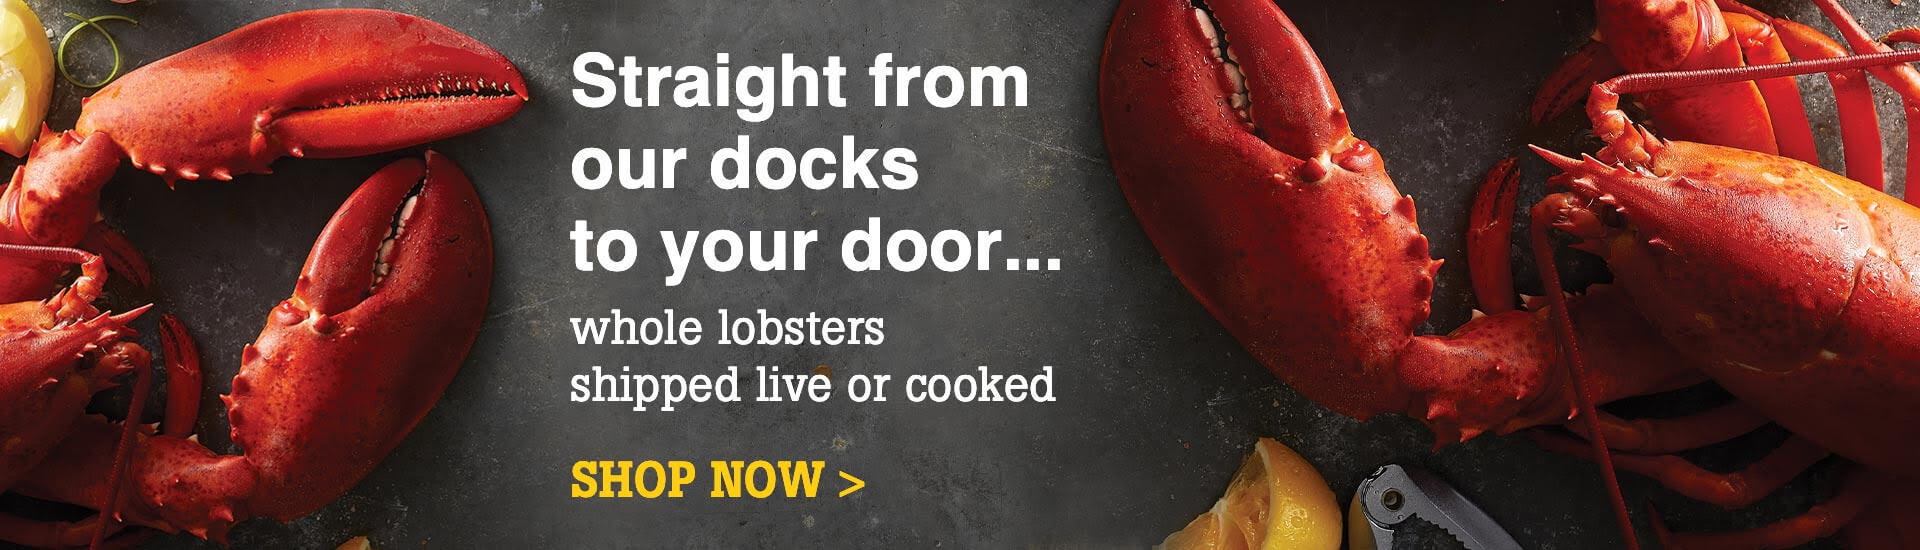 Straight from our docks to your door... whole lobsters shipped live or cooked